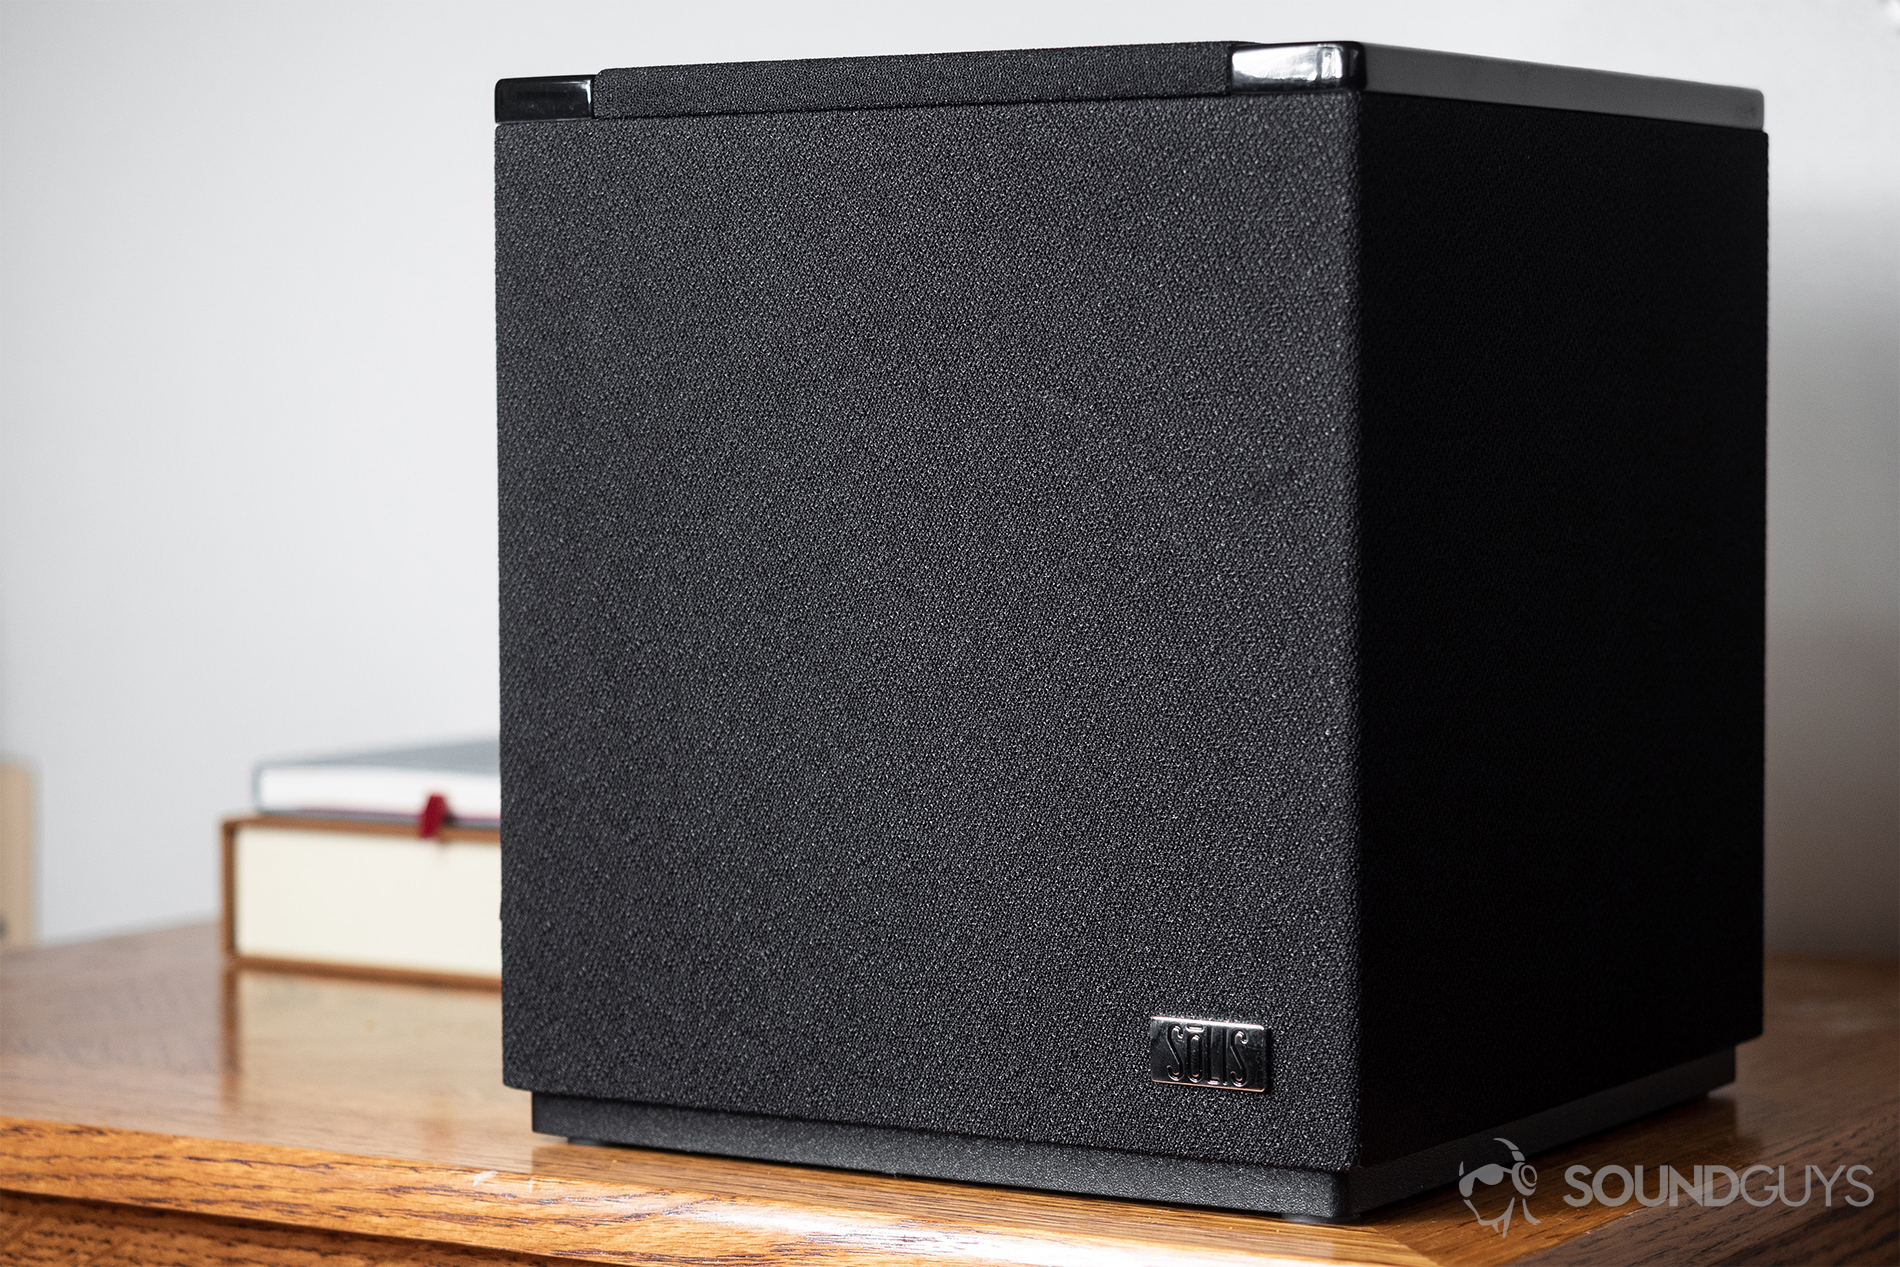 Solis SO-7000 review: Speaker on a wooden table with two stacked books in the background.